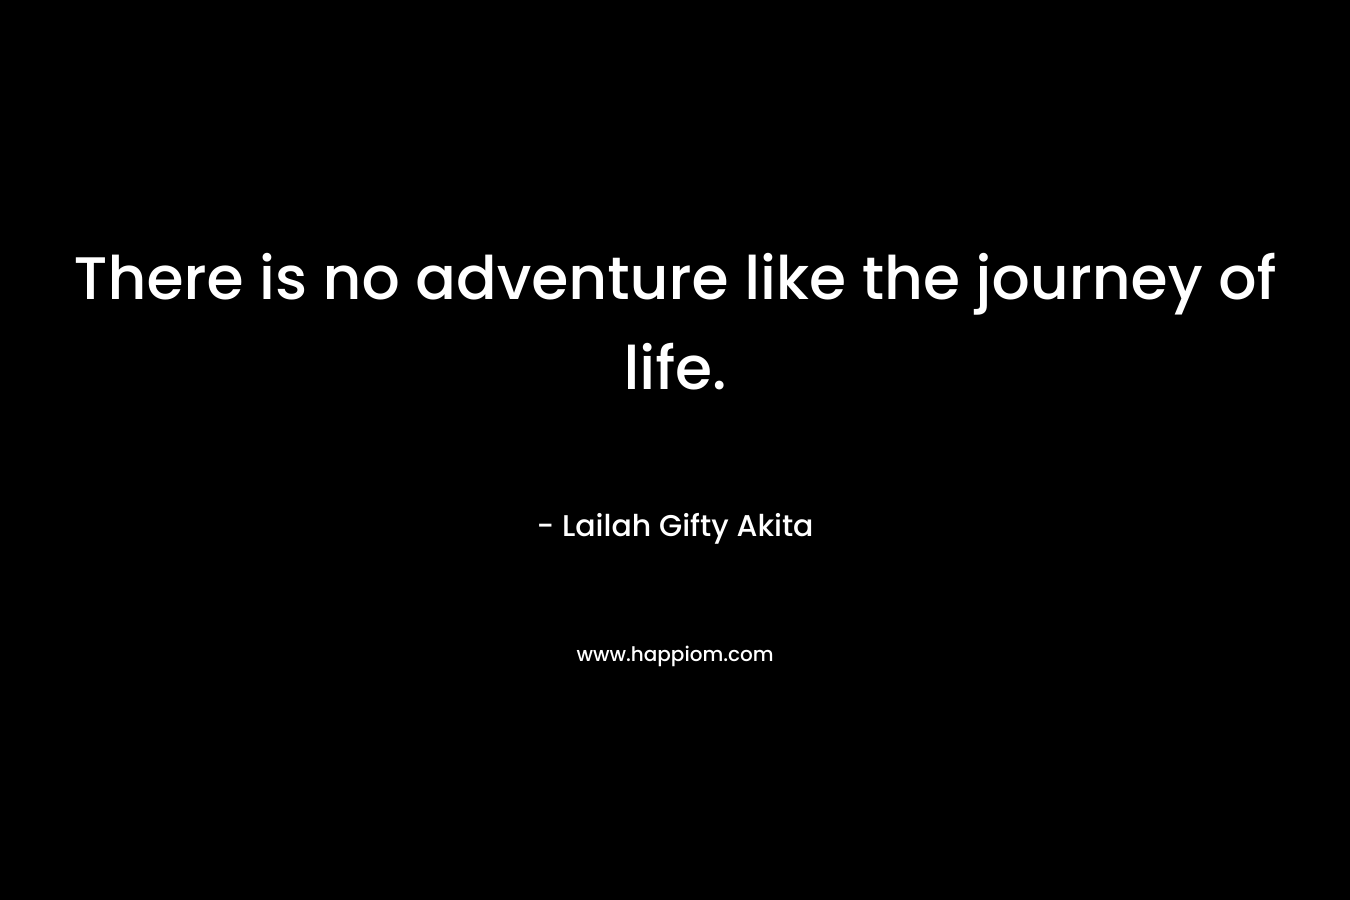 There is no adventure like the journey of life.